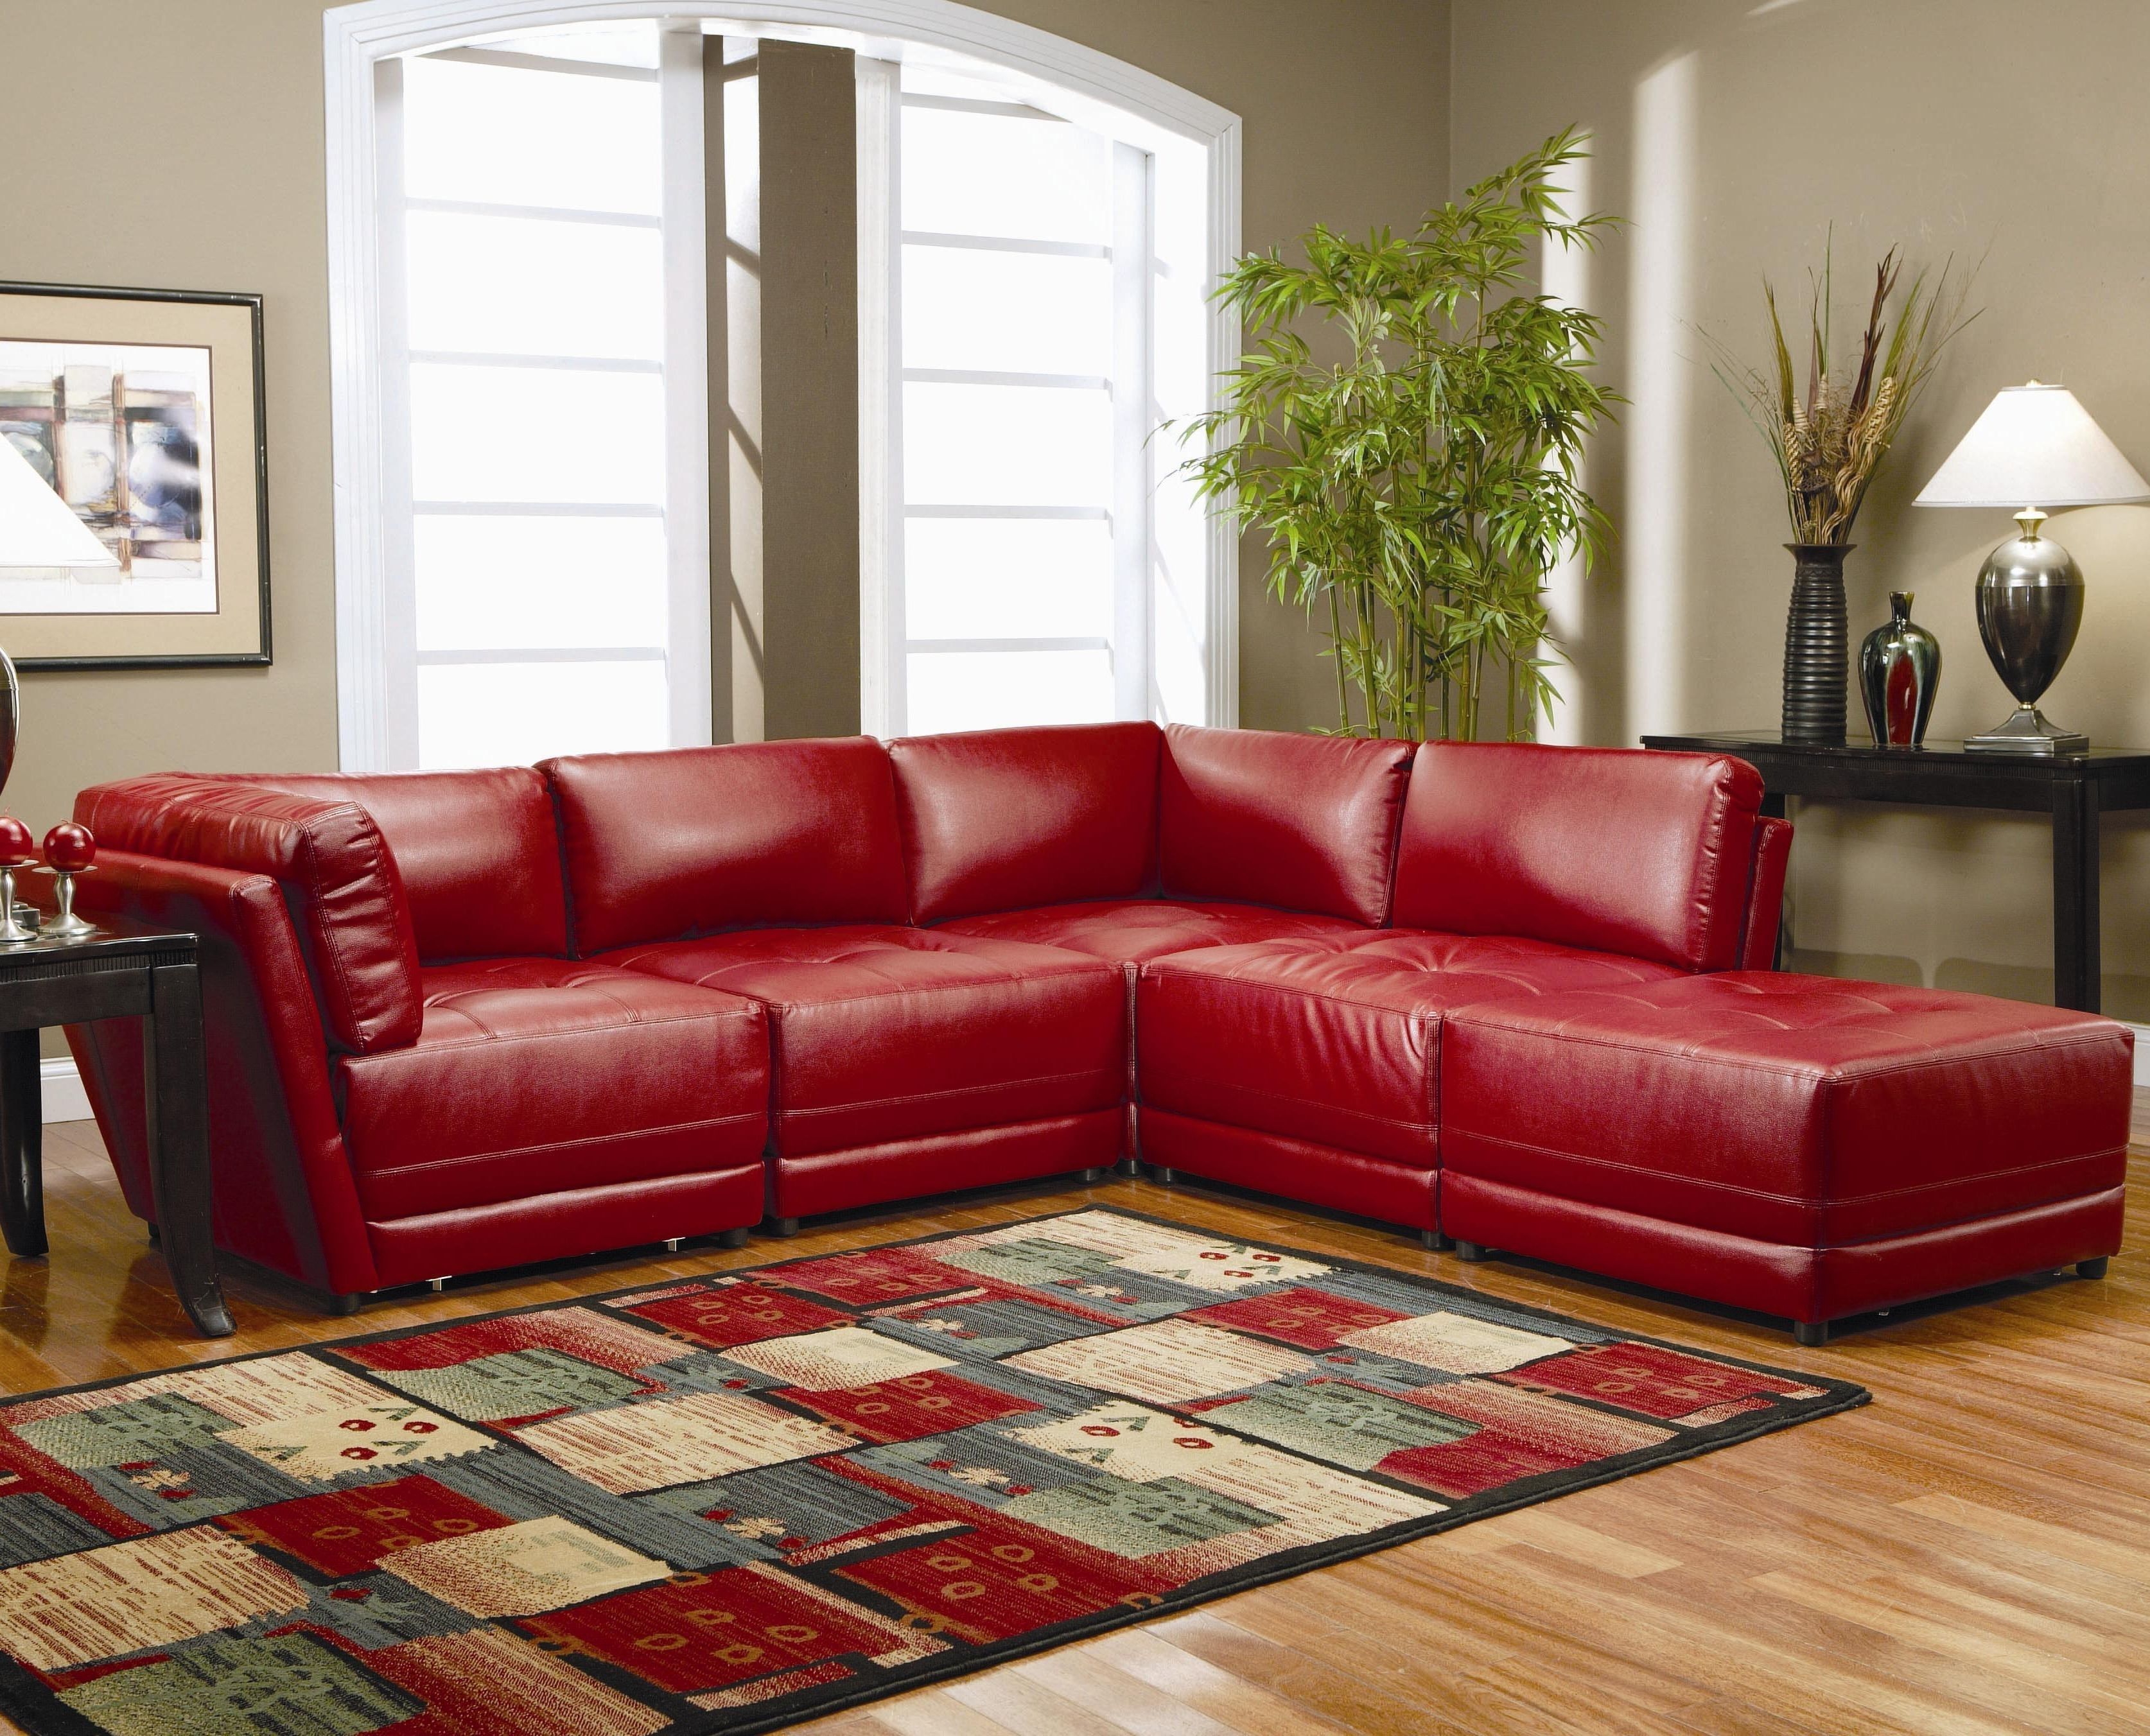 Red Leather Sectional Sofa Sale Hotelsbacau In Red Leather Sectional Couches 